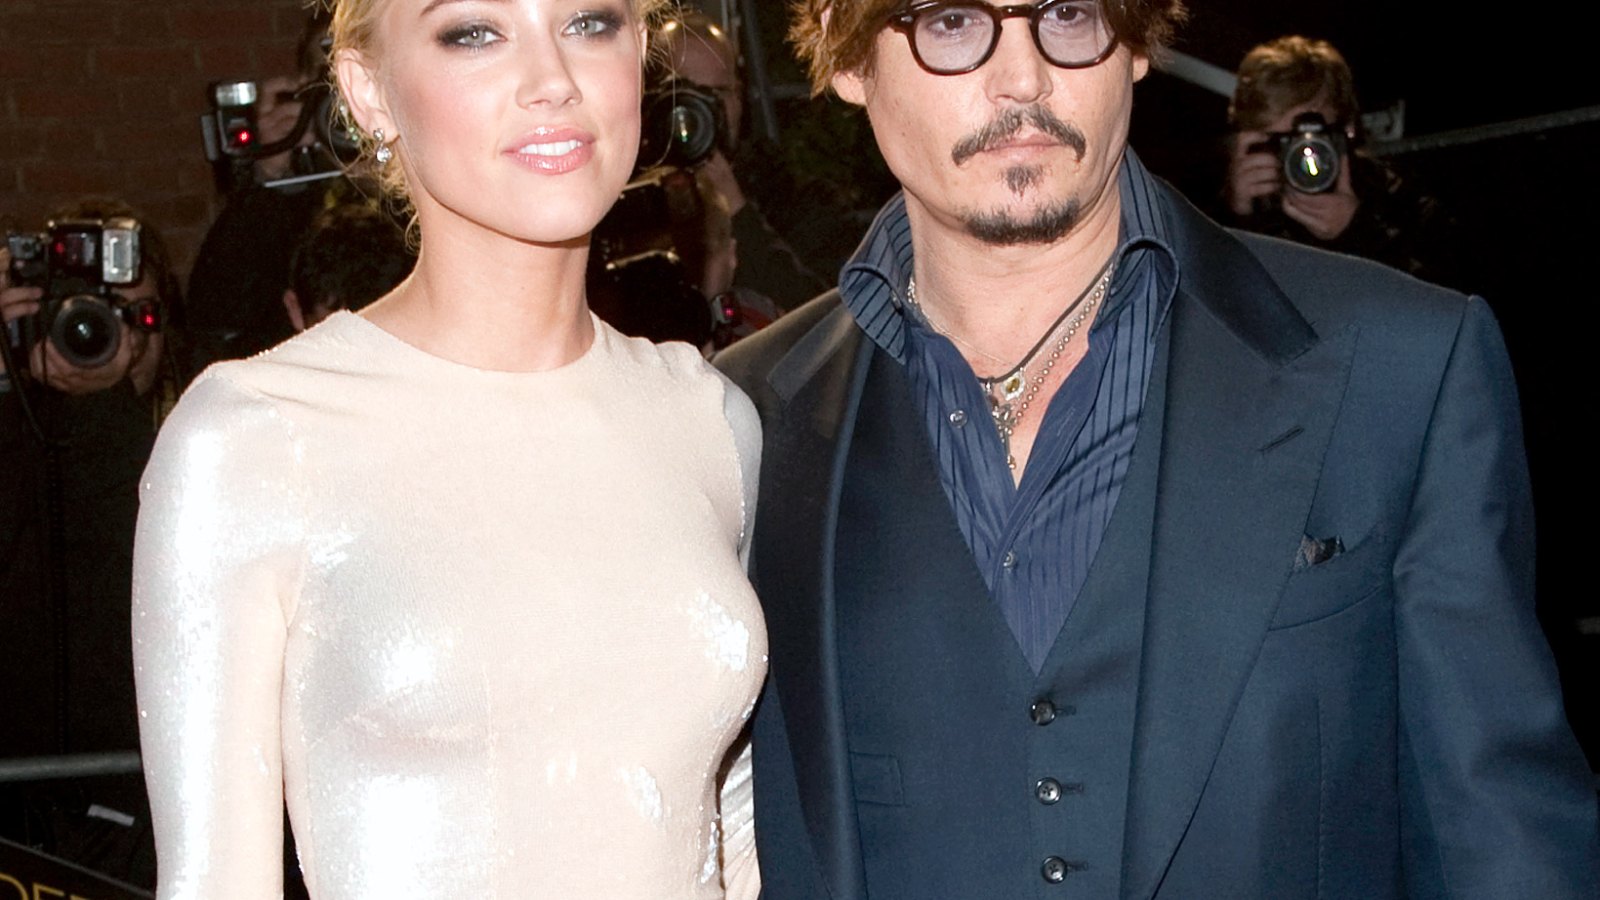 Amber Heard and Johnny Depp at the "Rum Diary" premiere